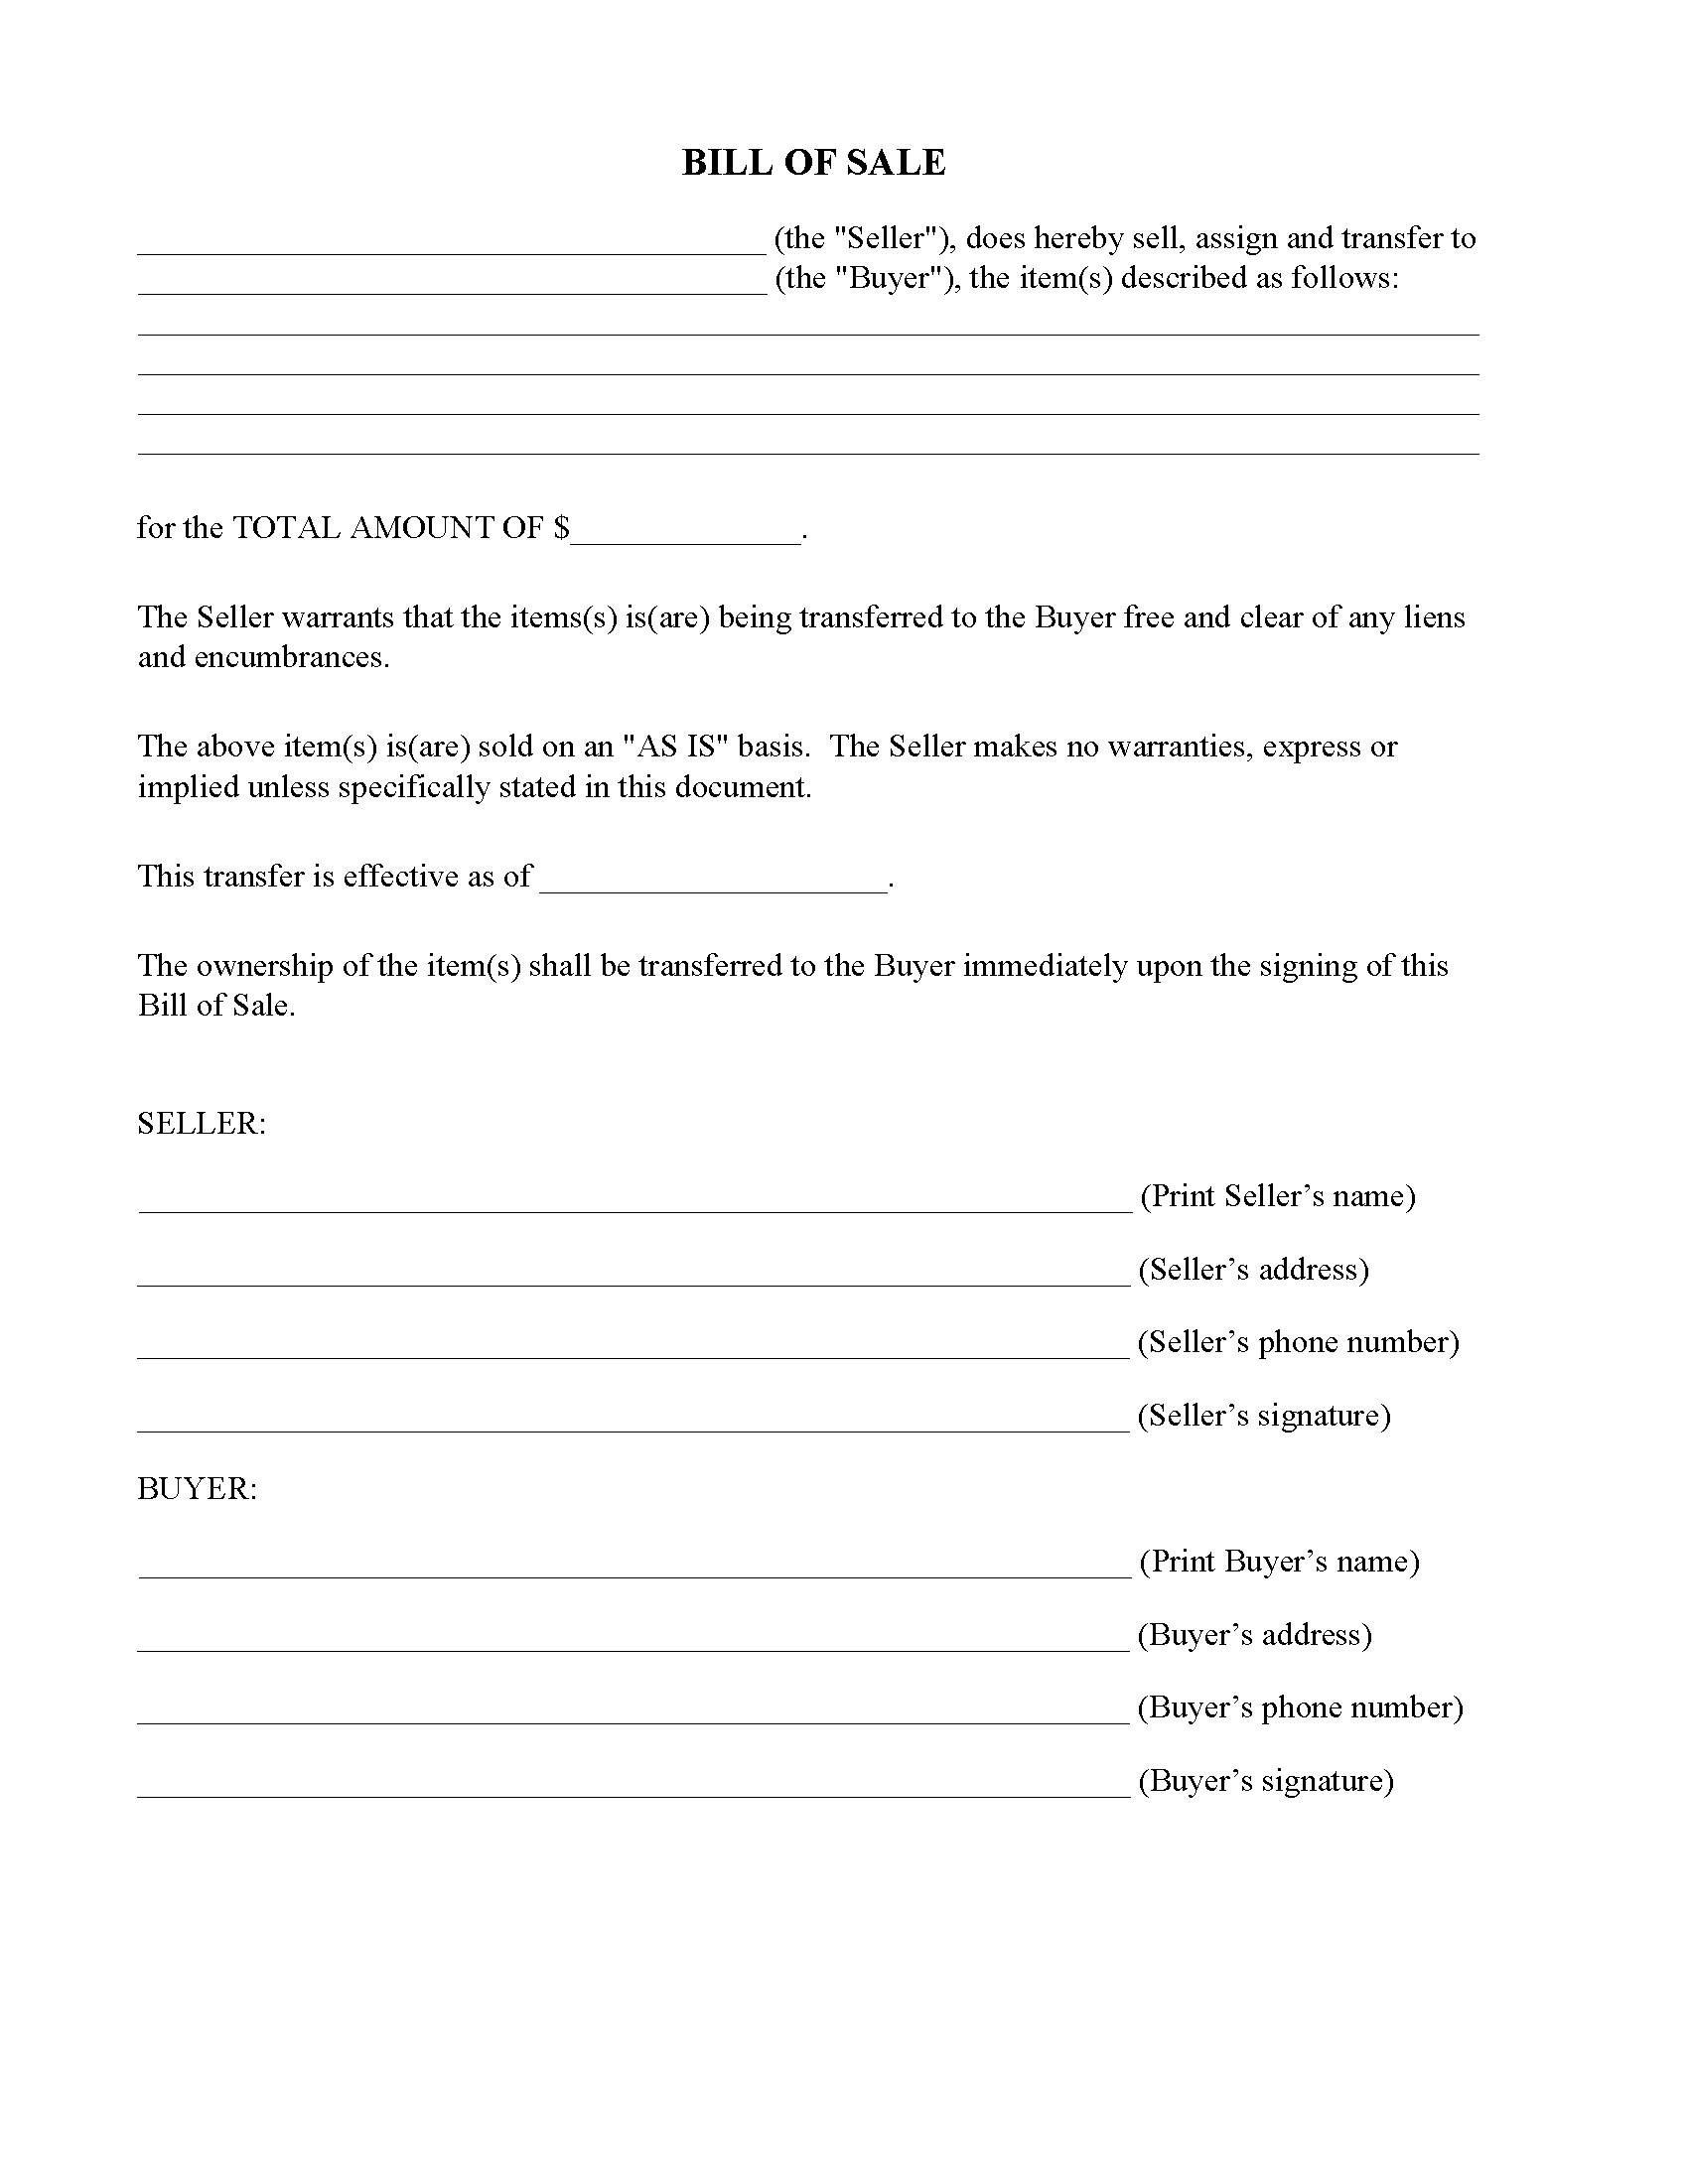 New Hampshire Simple Bill of Sale Form - Free Printable Legal Forms